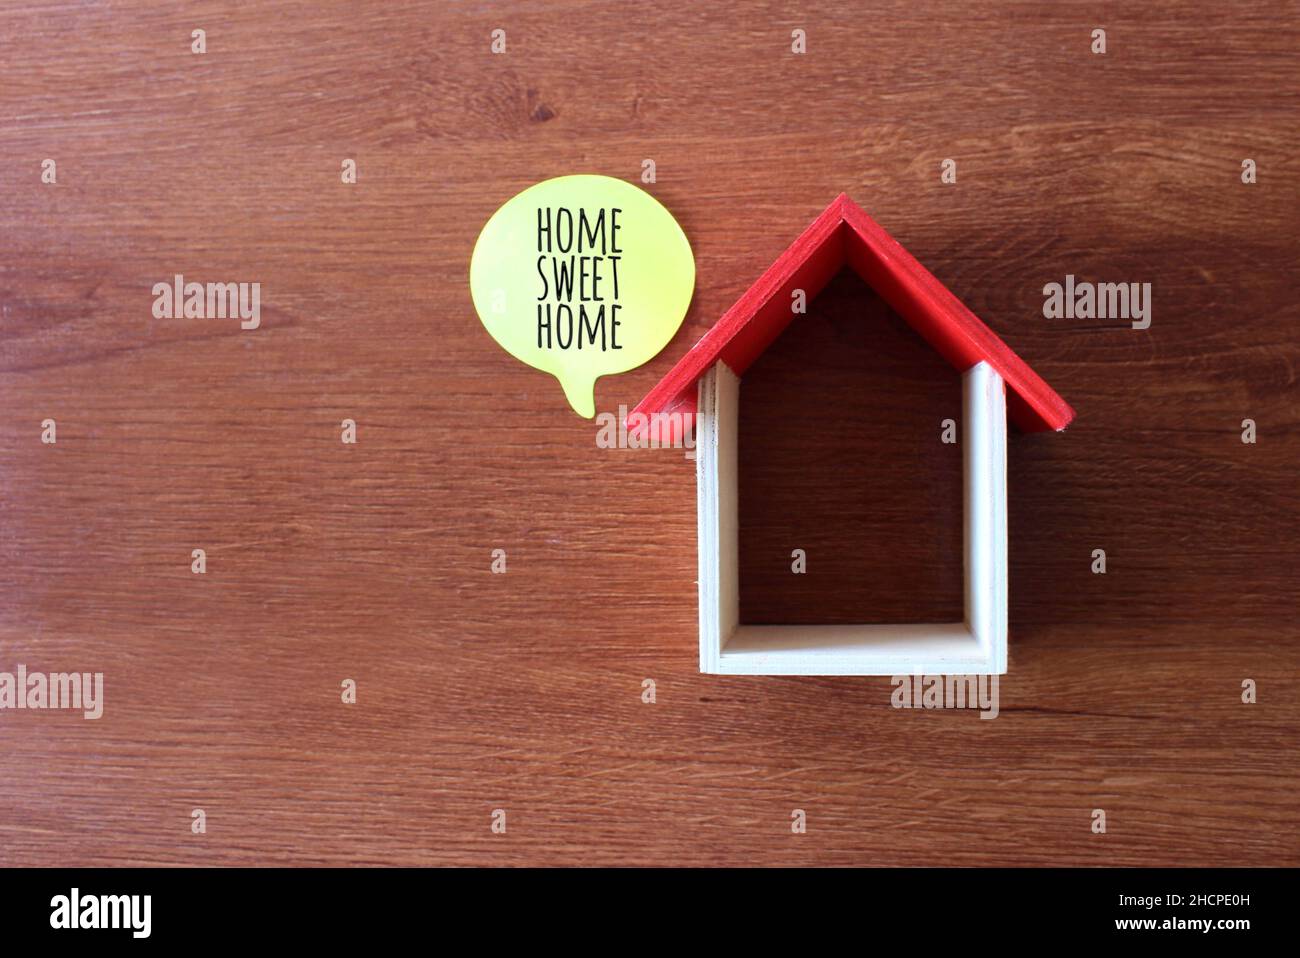 Top view image of wooden toy house and speech bubble with text HOME SWEET HOME Stock Photo